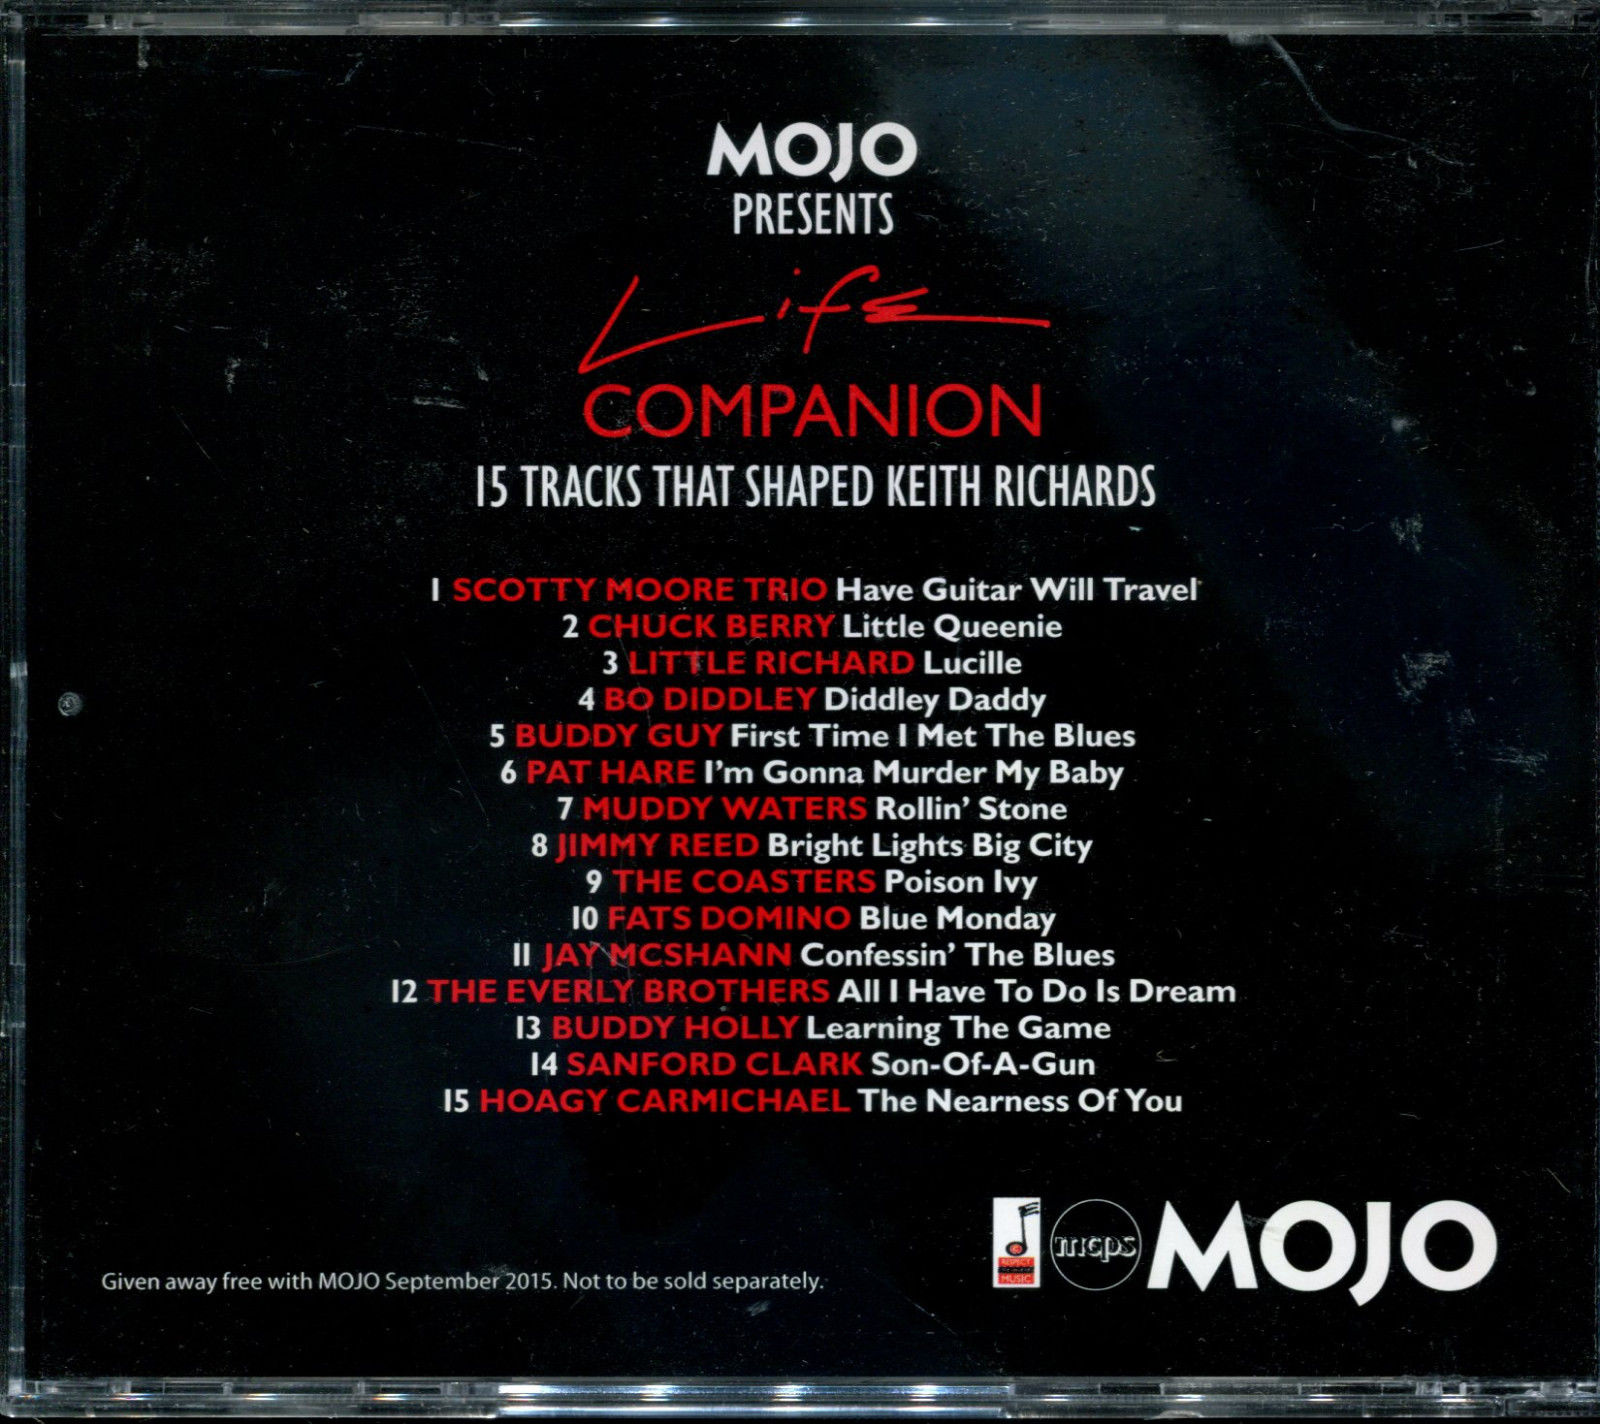 V/A incl. Muddy Waters, Chuck Berry, Little Richard, Bo Diddley, etc - Life Companion, 15 tracks that shaped Keith Richards - Mojo  UK CD